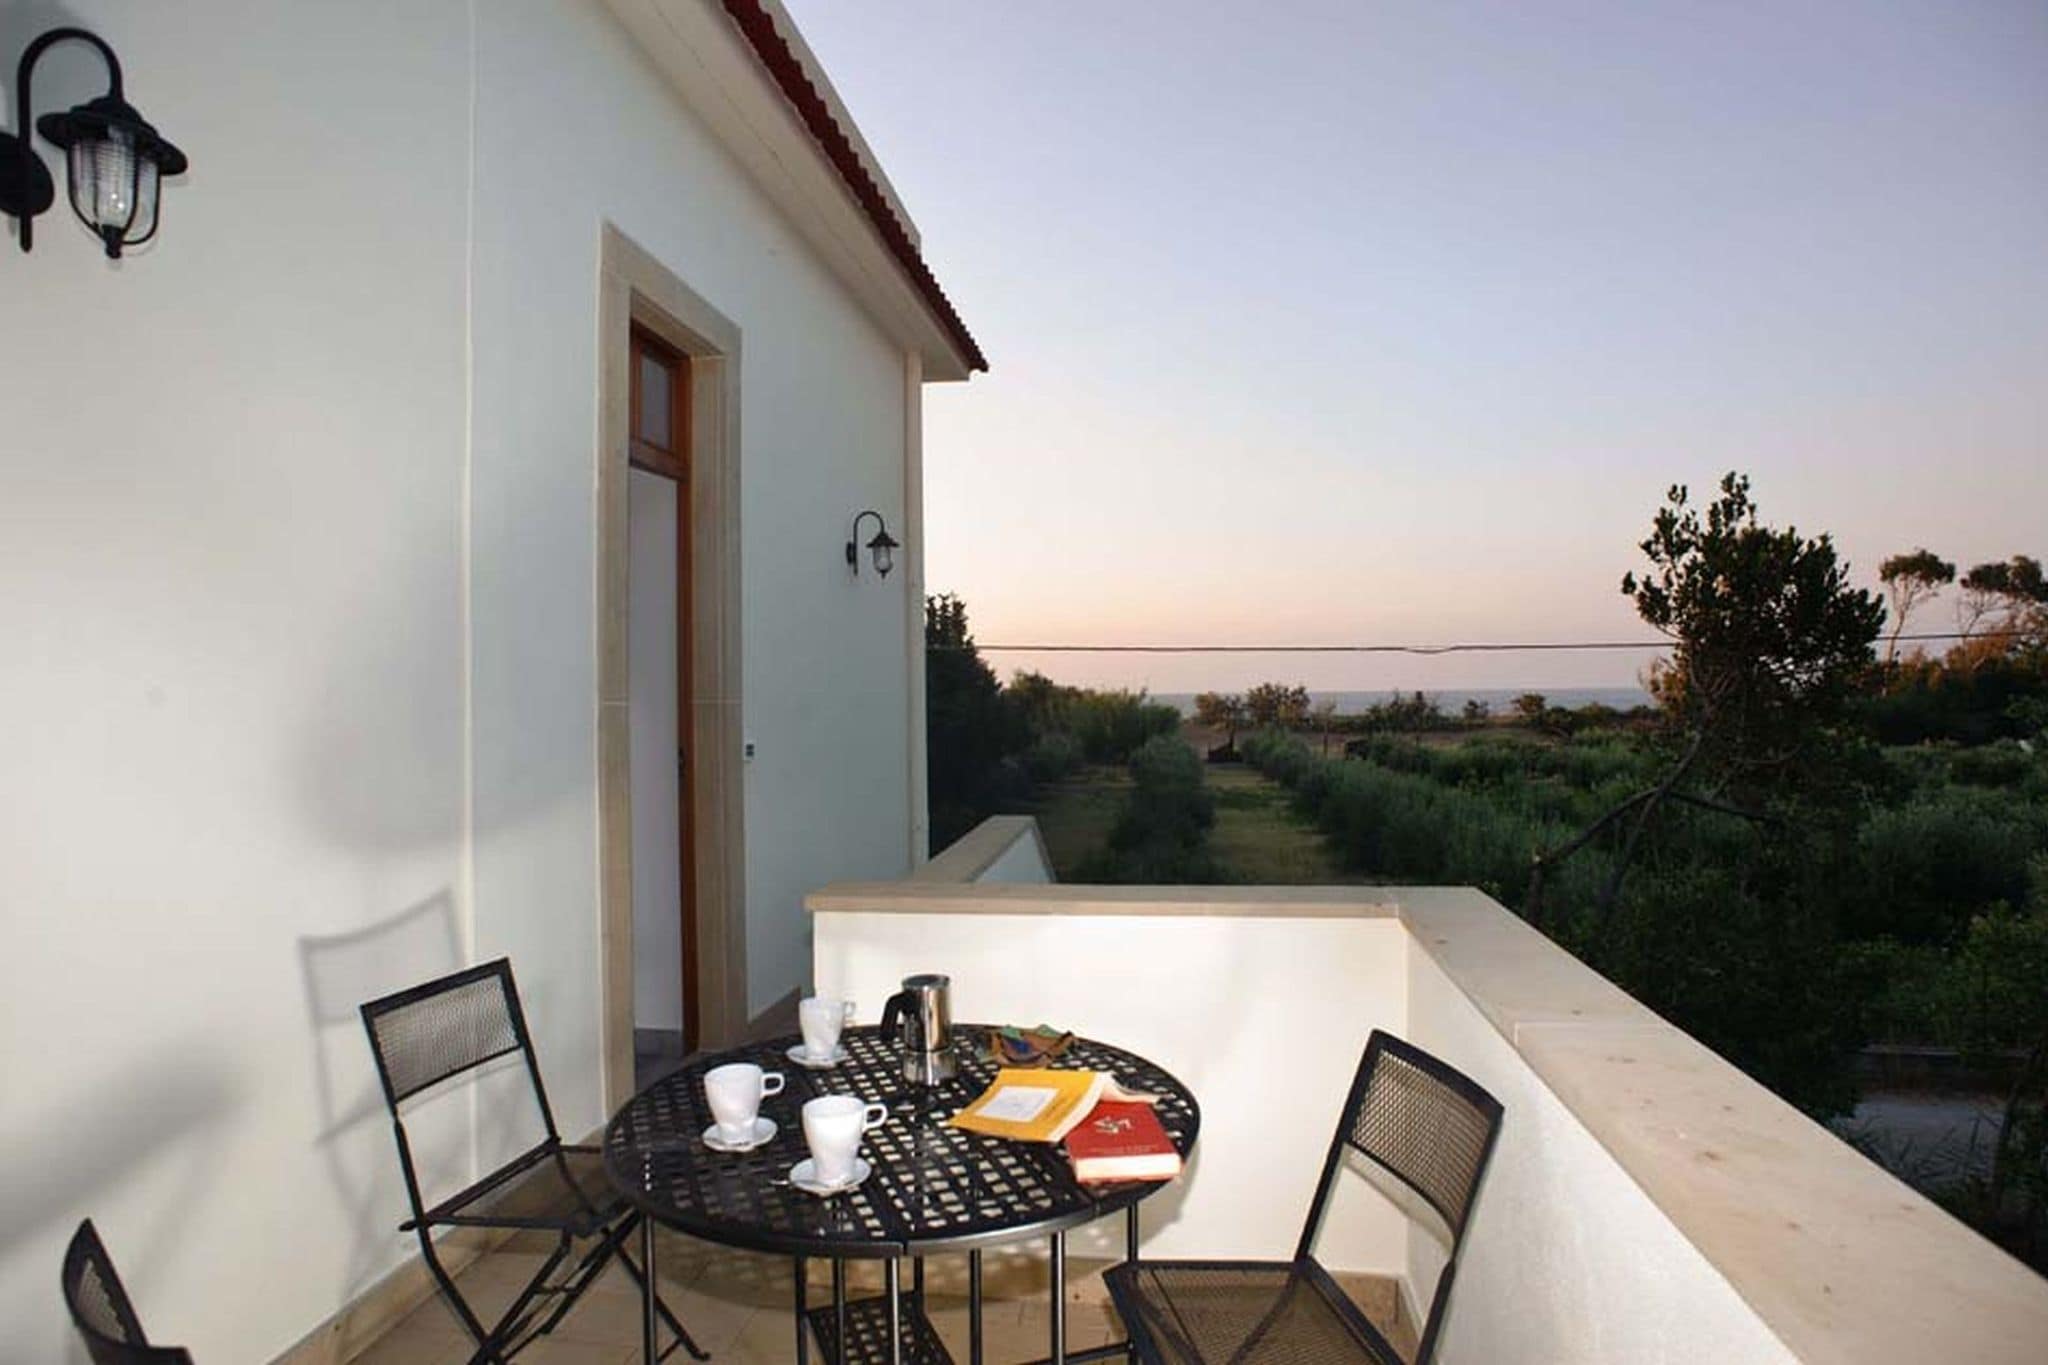 Detached villa in an excellent location, only 200 meters from the sea!